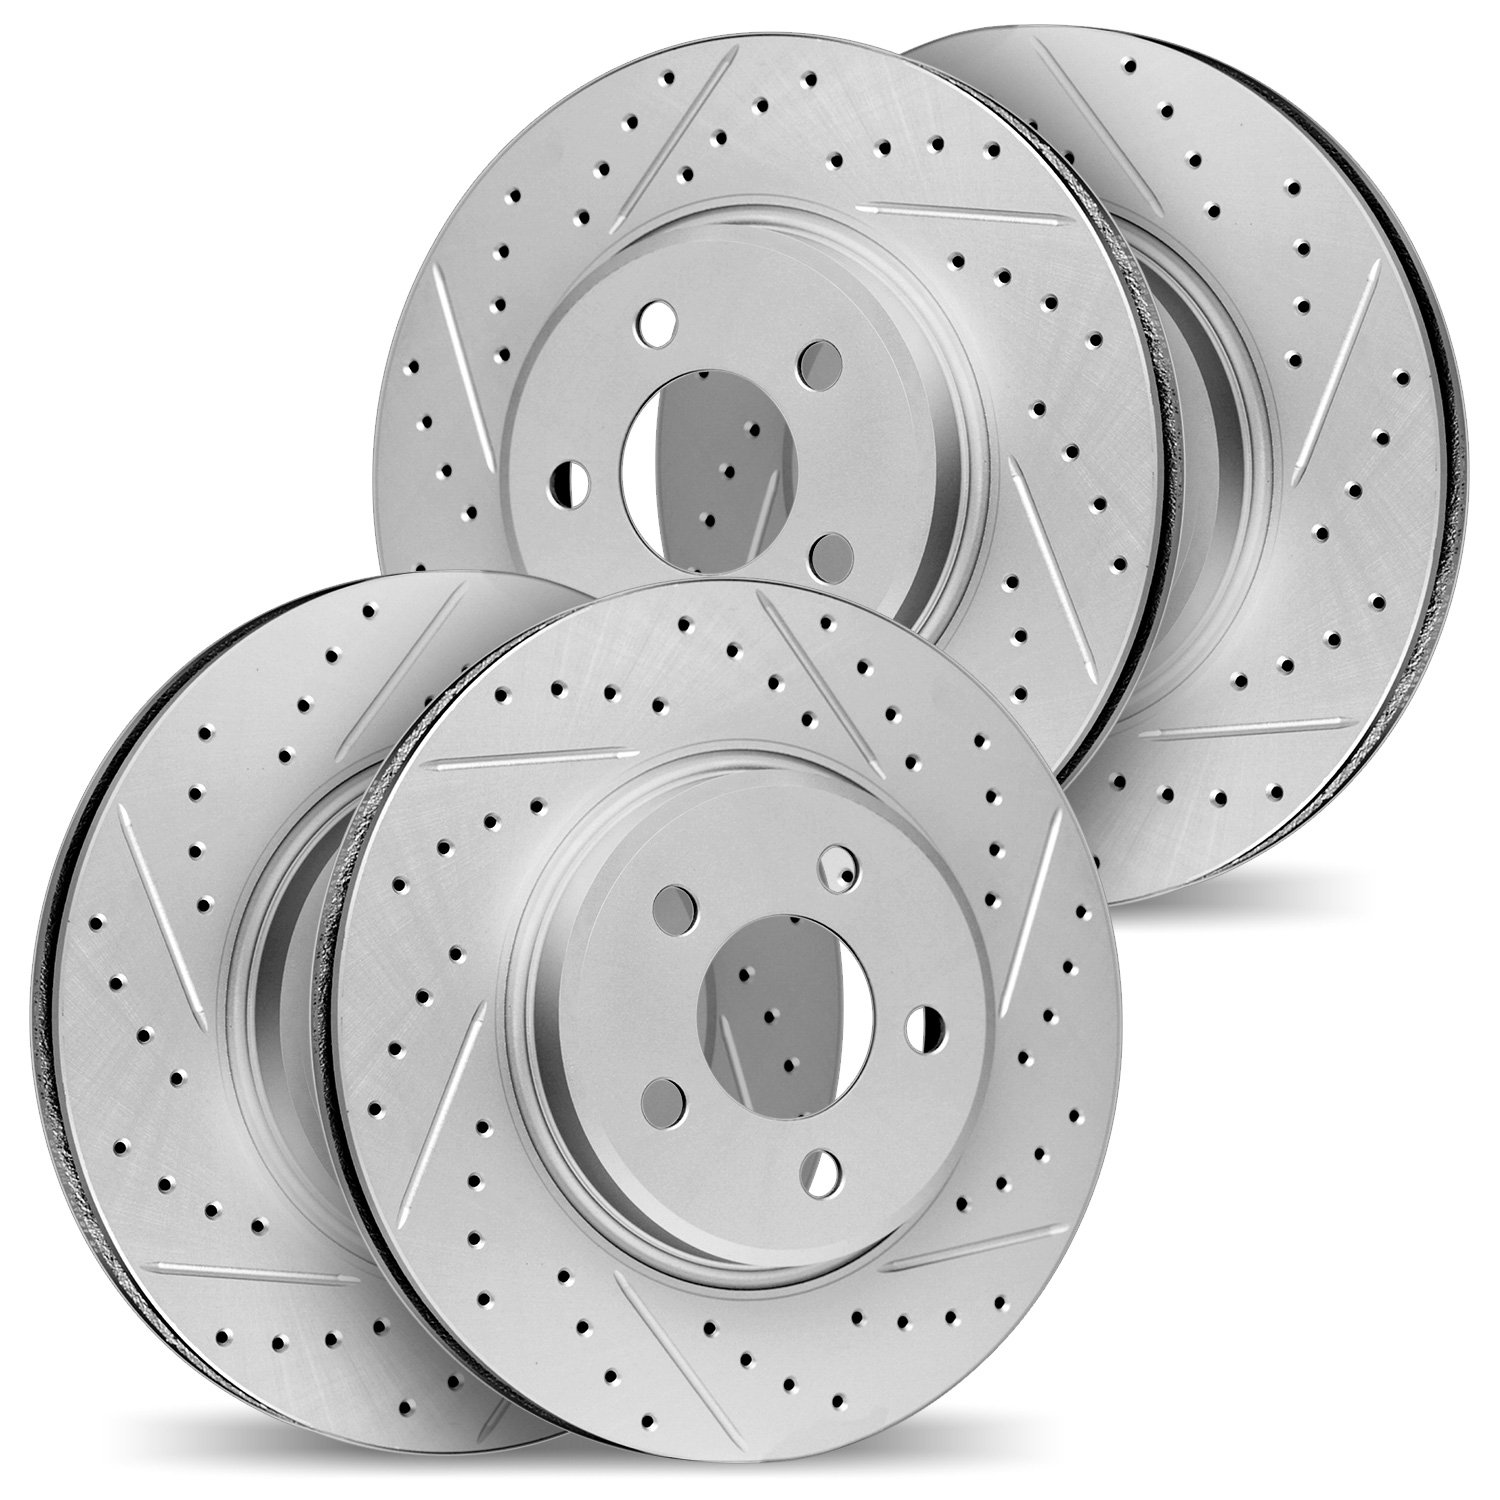 2004-13011 Geoperformance Drilled/Slotted Brake Rotors, Fits Select Subaru, Position: Front and Rear